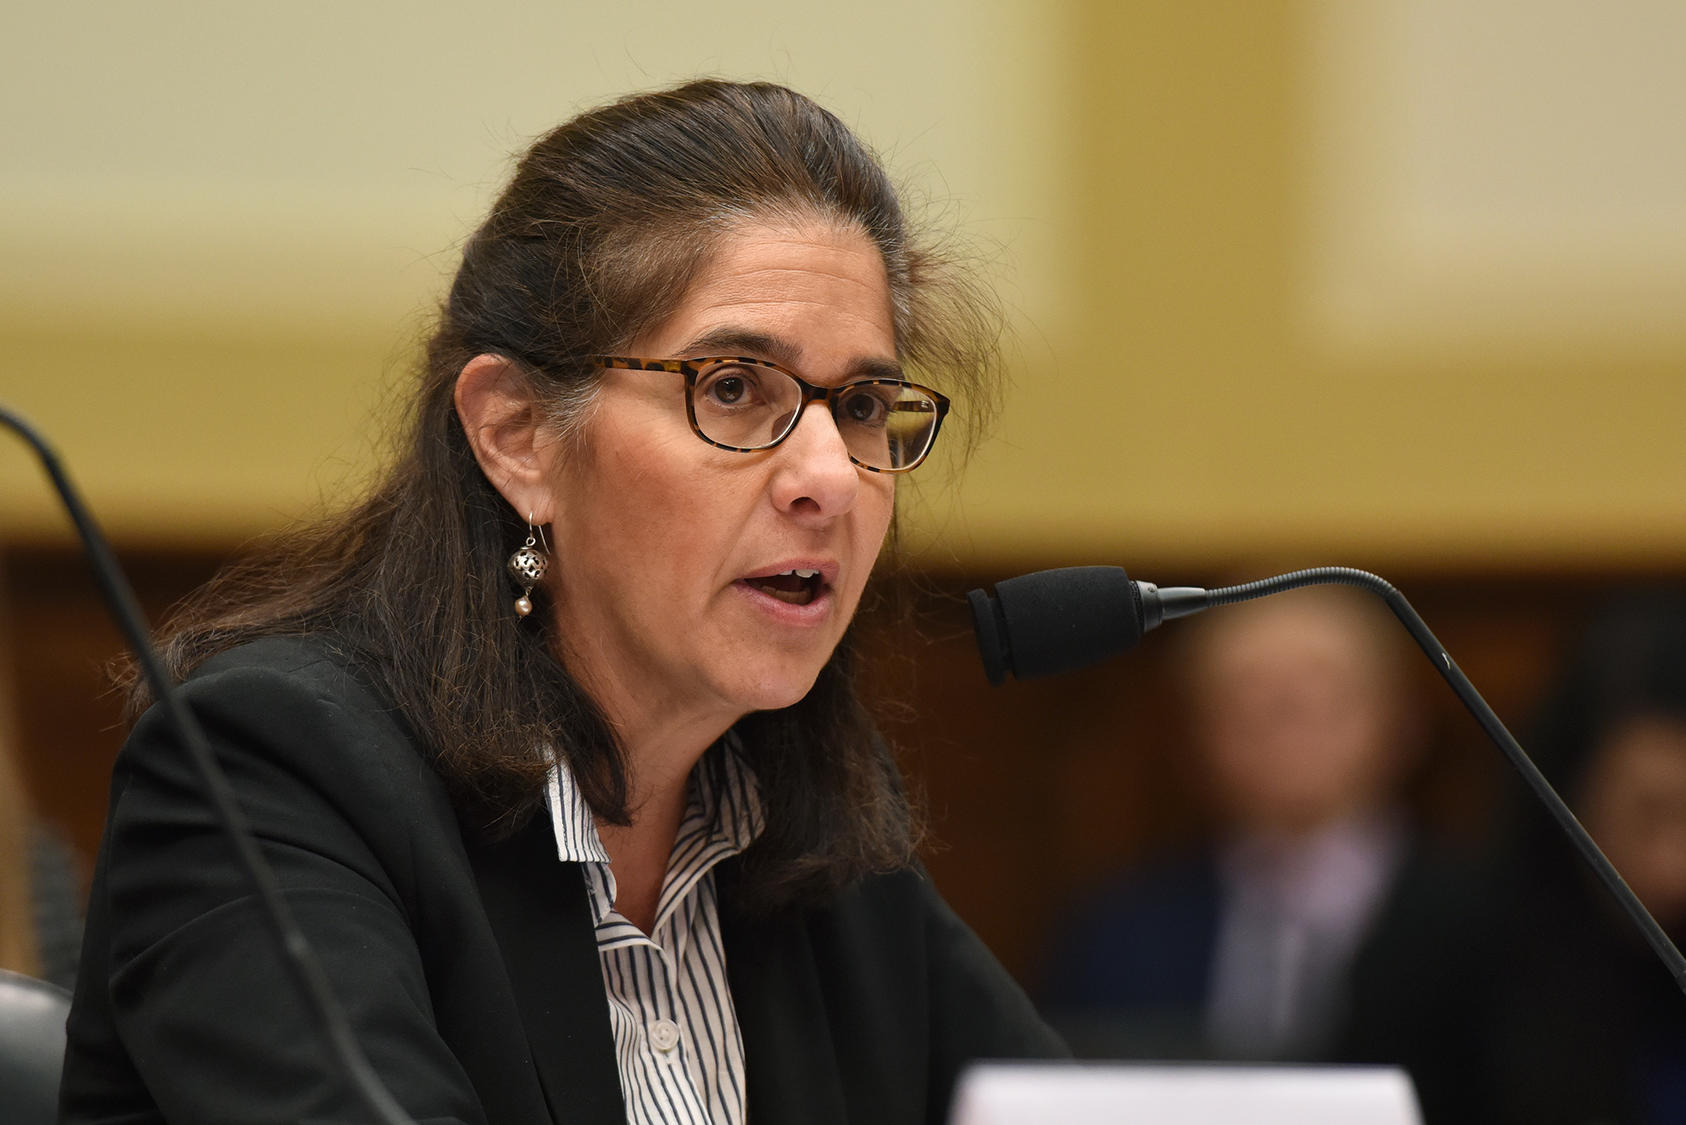 Mona Yacoubian testifies before the House Foreign Affairs Subcommittee on Middle East and North Africa, September 27, 2018.